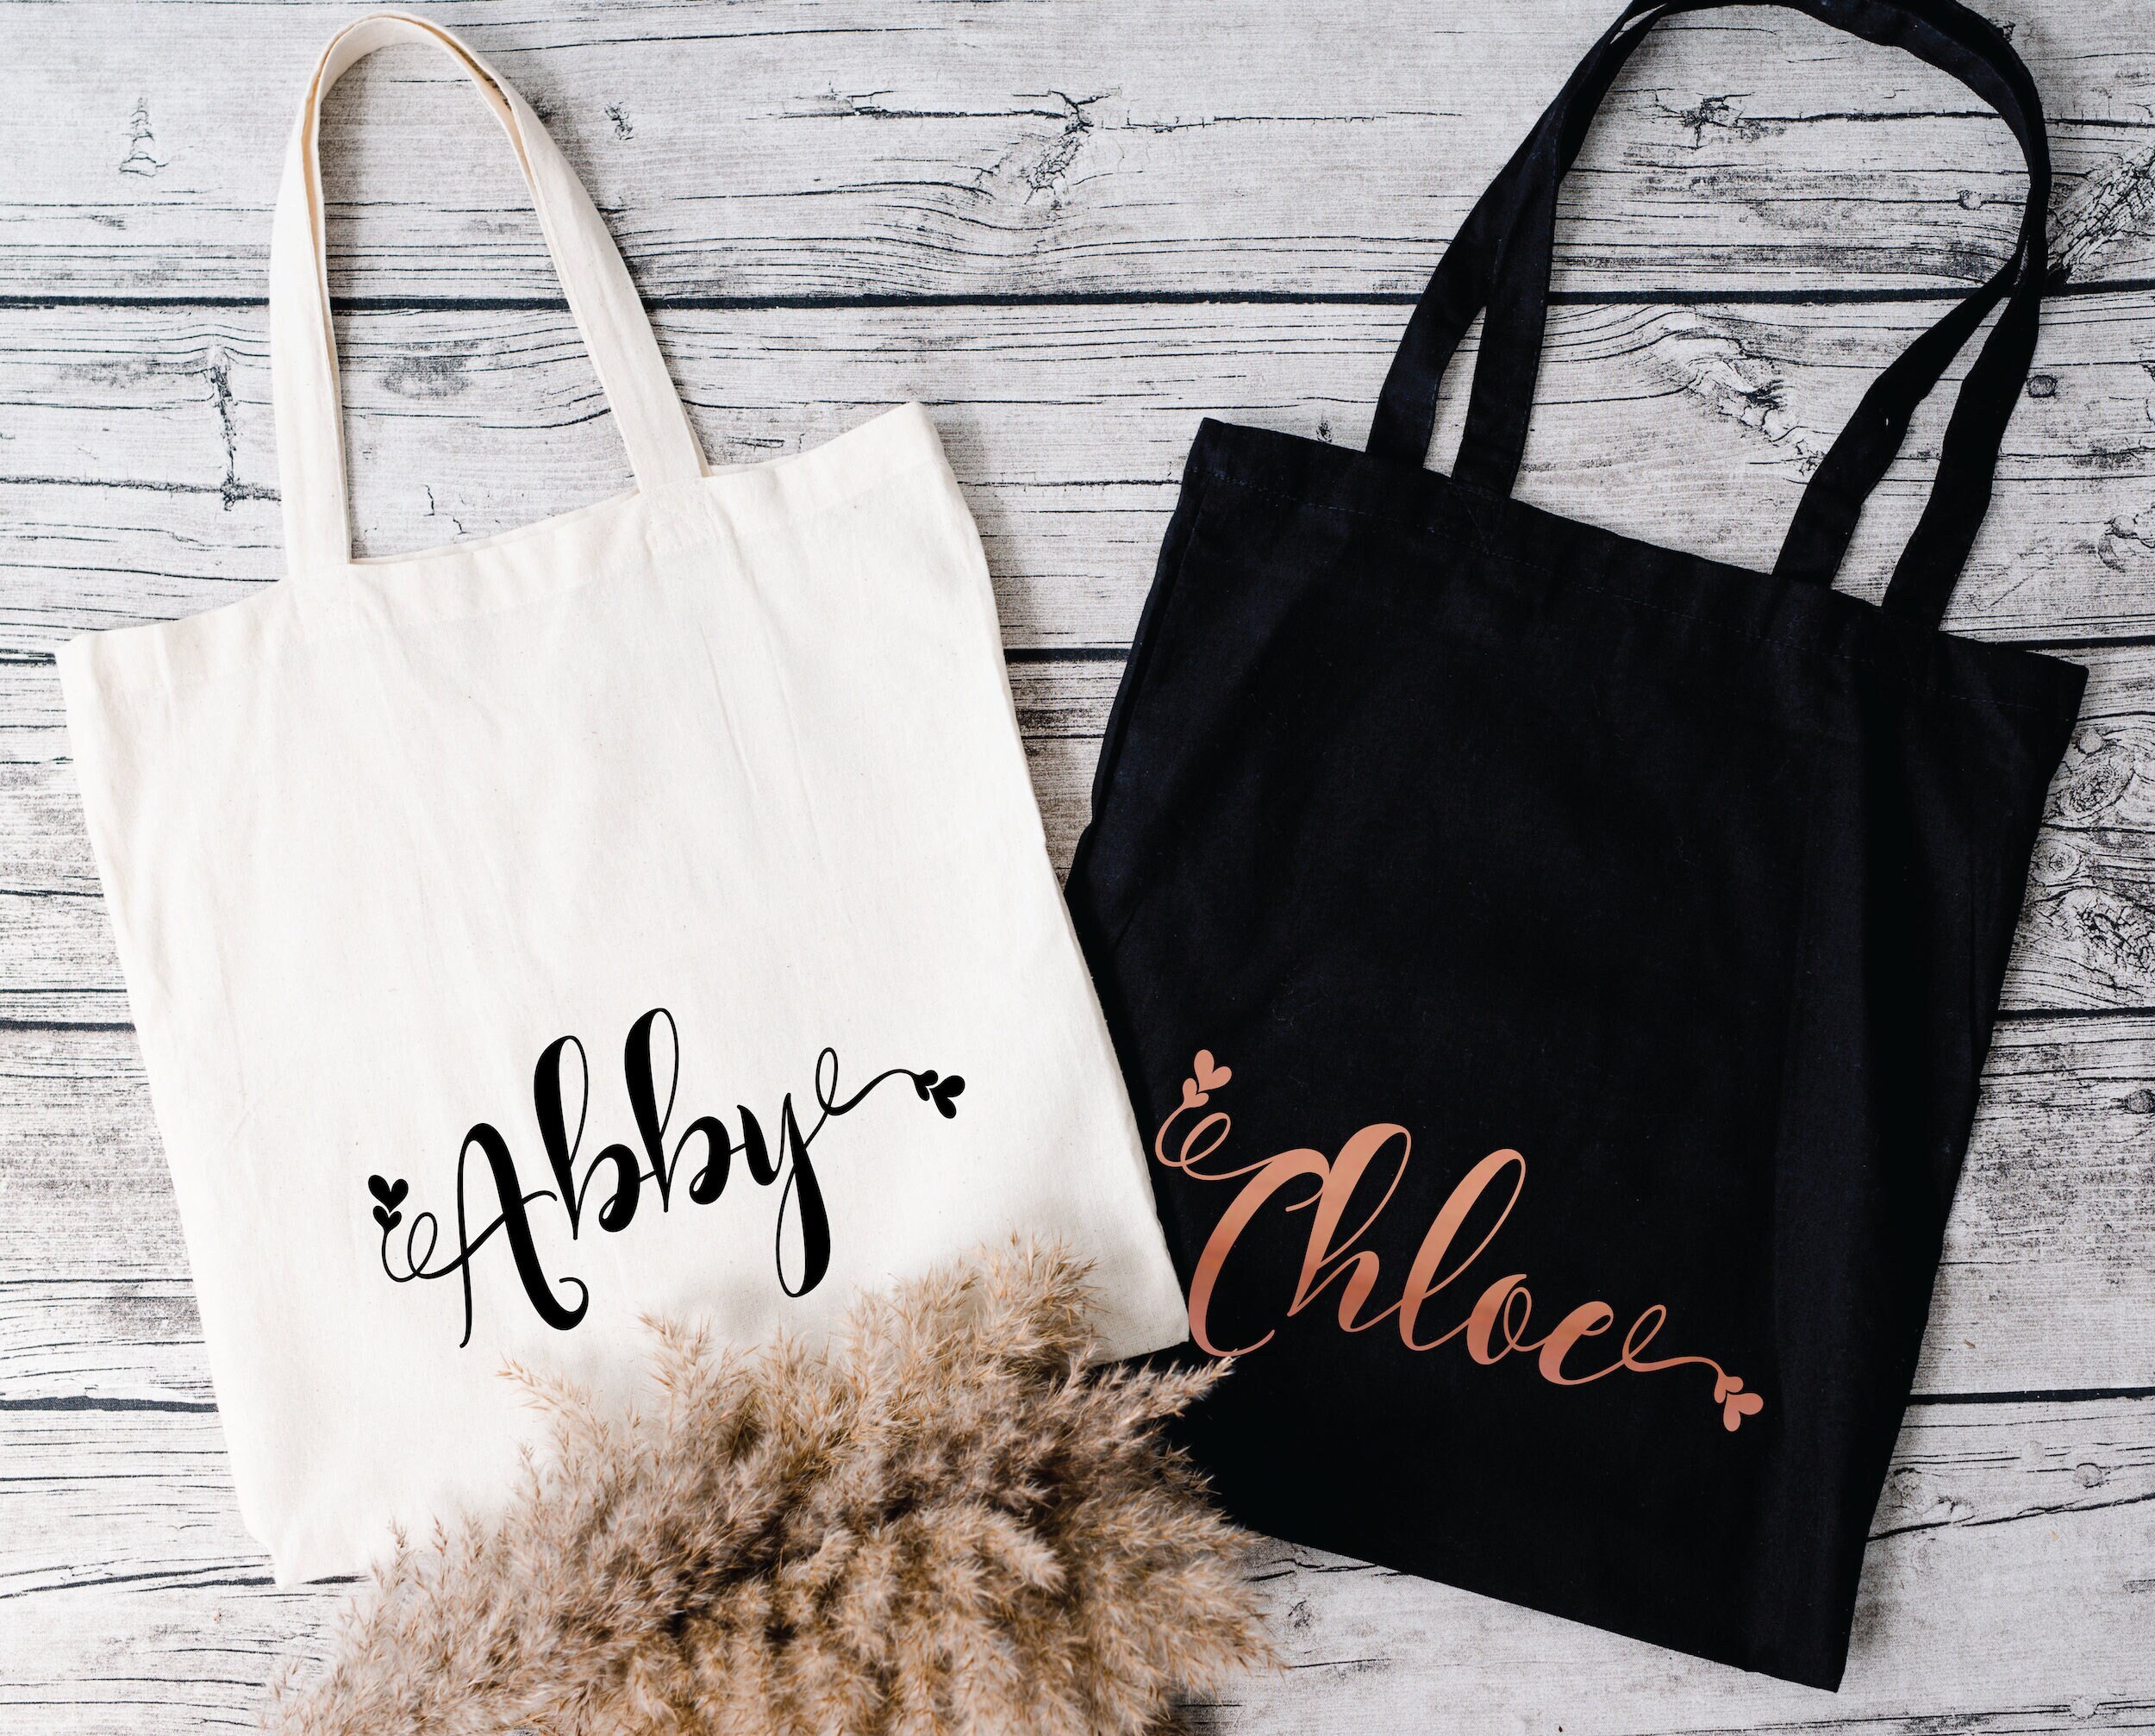 Monogram Name Tote Bag, Personalized Tote Bags, Bridesmaid Tote, Beach  Tote, Bridesmaid Gift, Bridal Party Gifts, Wedding Welcome Bag